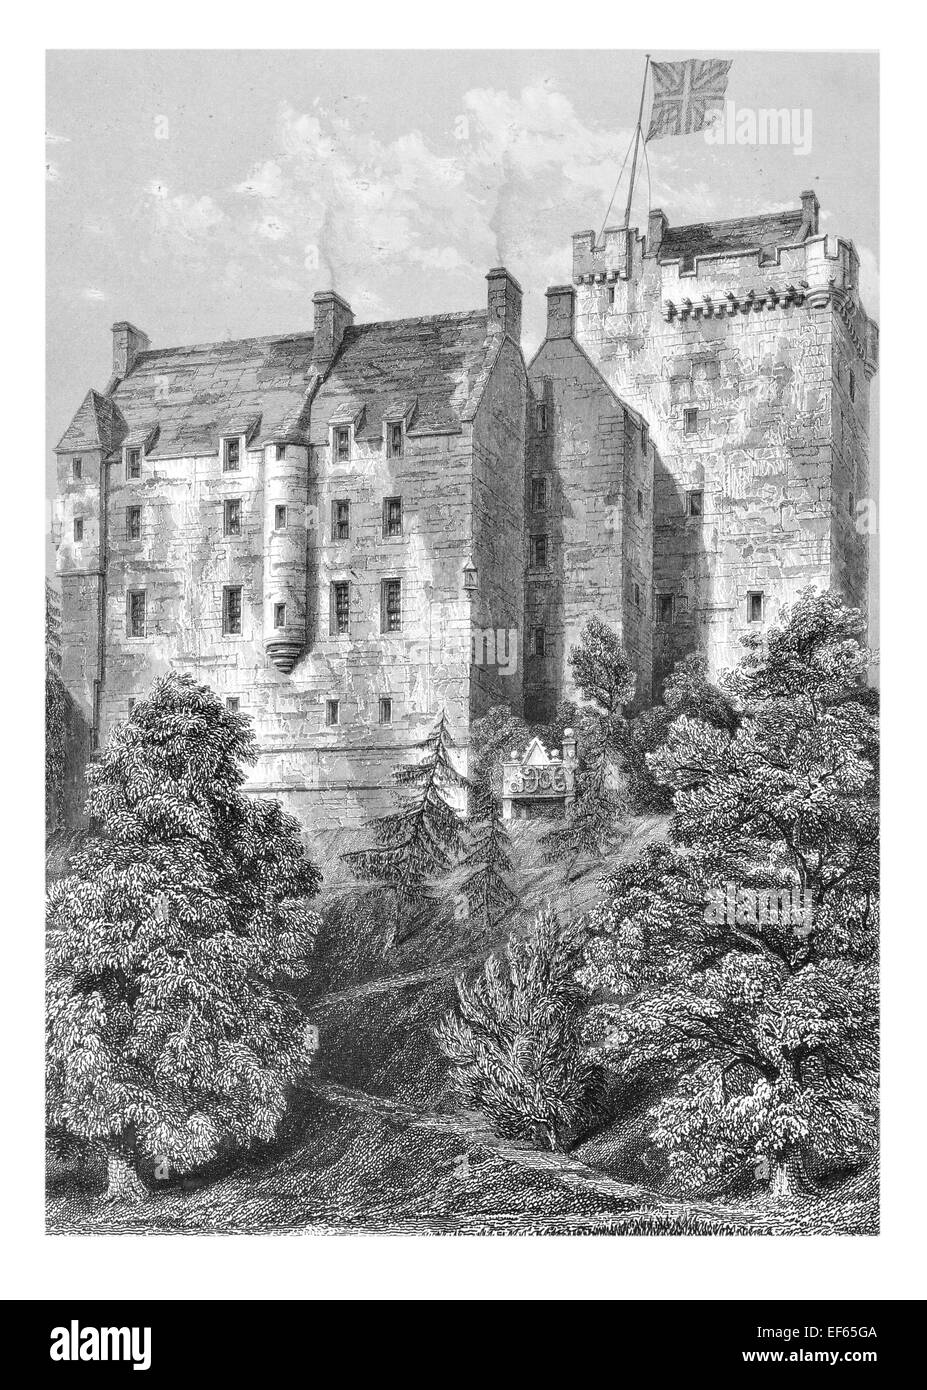 1852 Kilravock Castle Cill Rathaig Nairn  Croy  Inverness  Highland  Clan Rose 15th century tower house Stock Photo